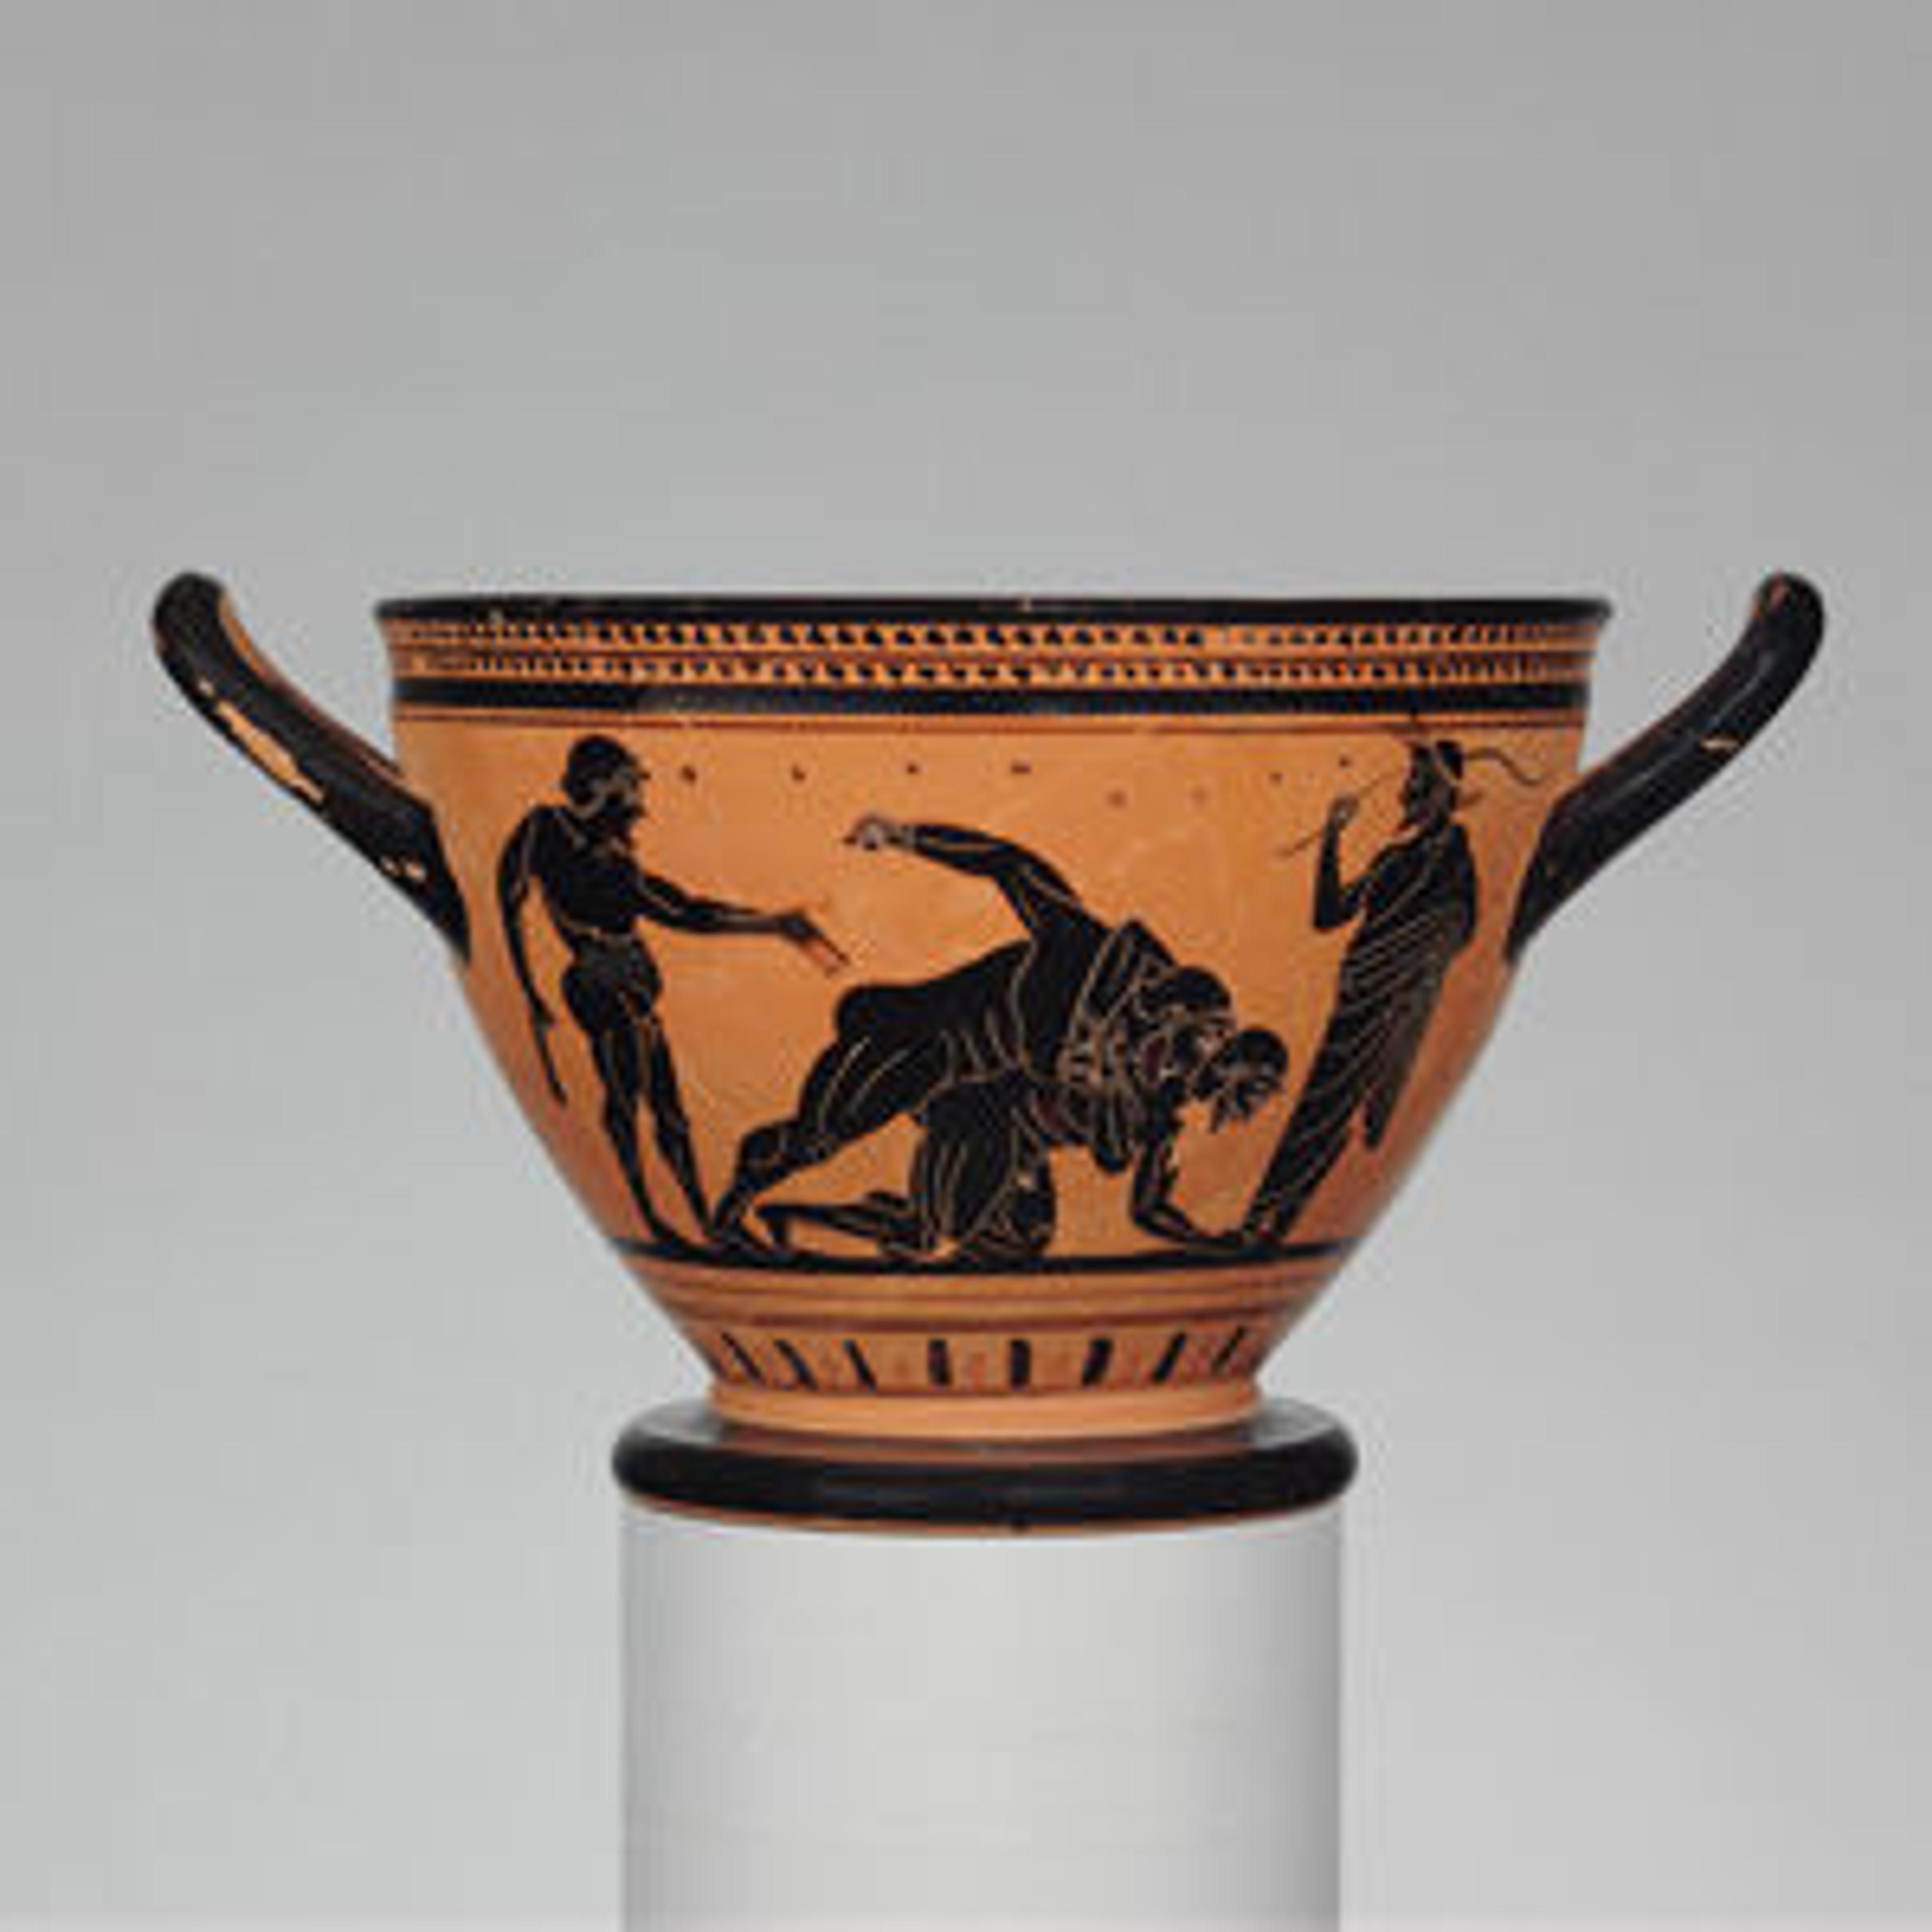 Skyphos (Deep Drinking Cup) with a Pankration competition, Greek, Attic, Archaic period, ca. 500 B.C., attributed to the Theseus Painter, terracotta.